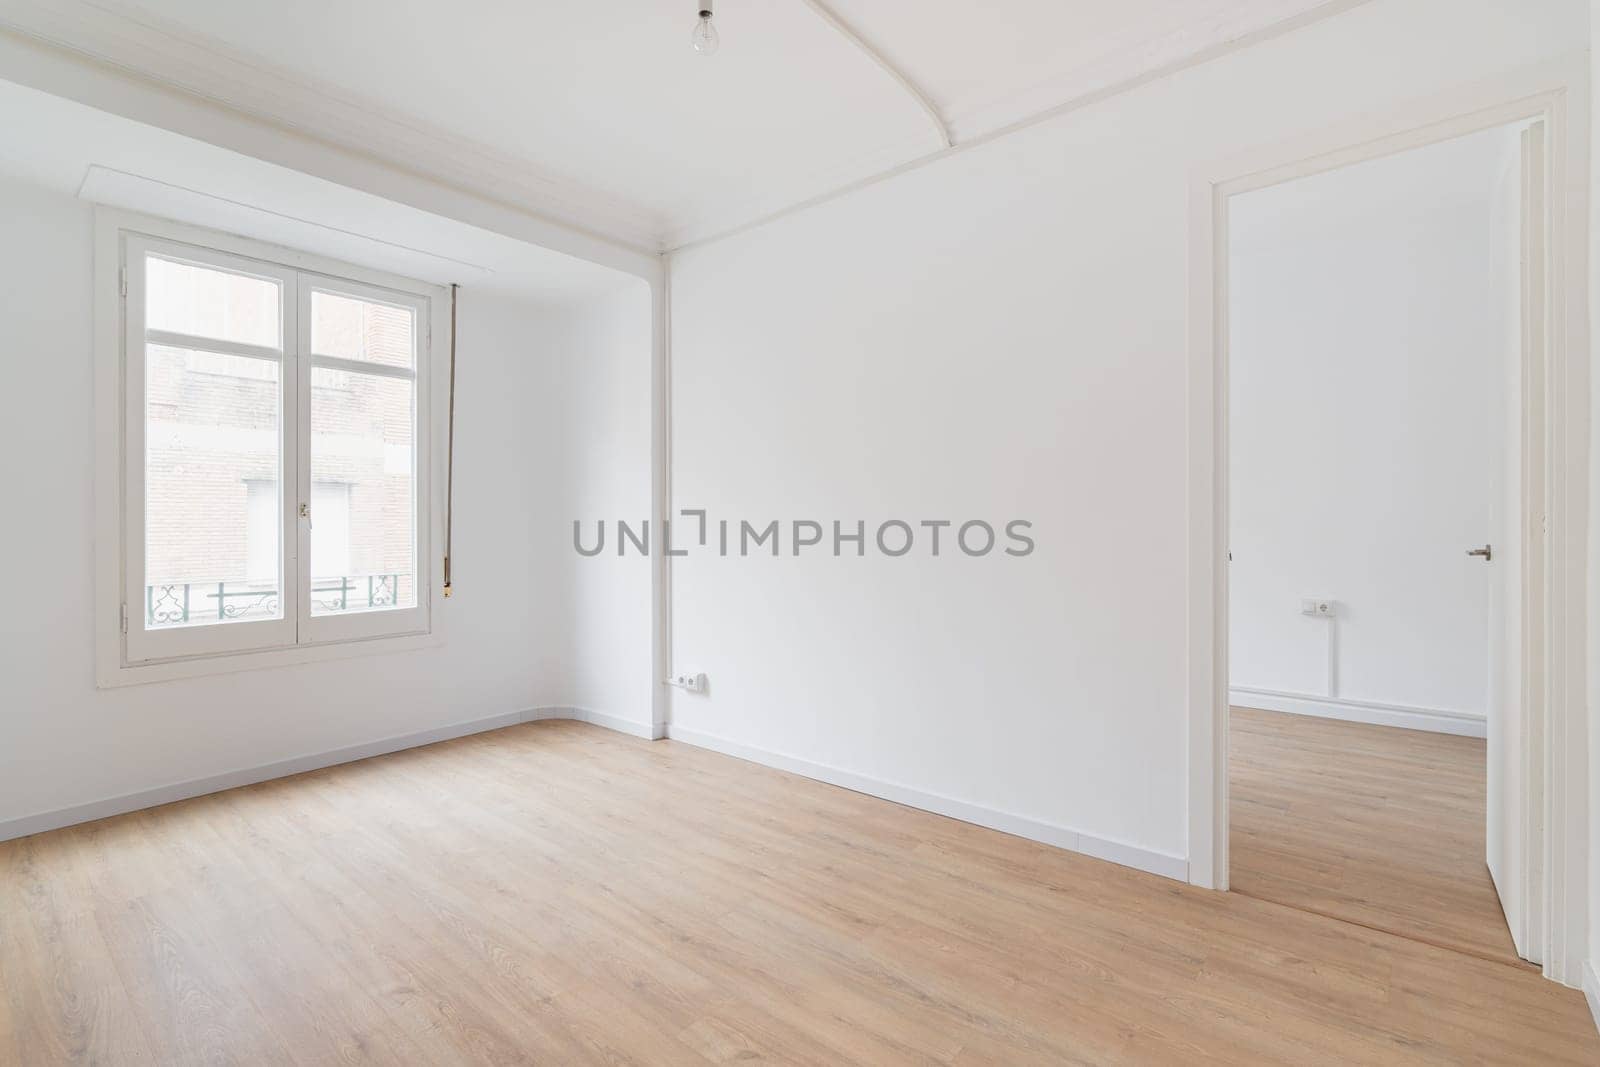 Bright white spacious unfurnished apartment with an window and wooden textured laminate. Concept of modern building or moving to new apartment. Interior design renovation.